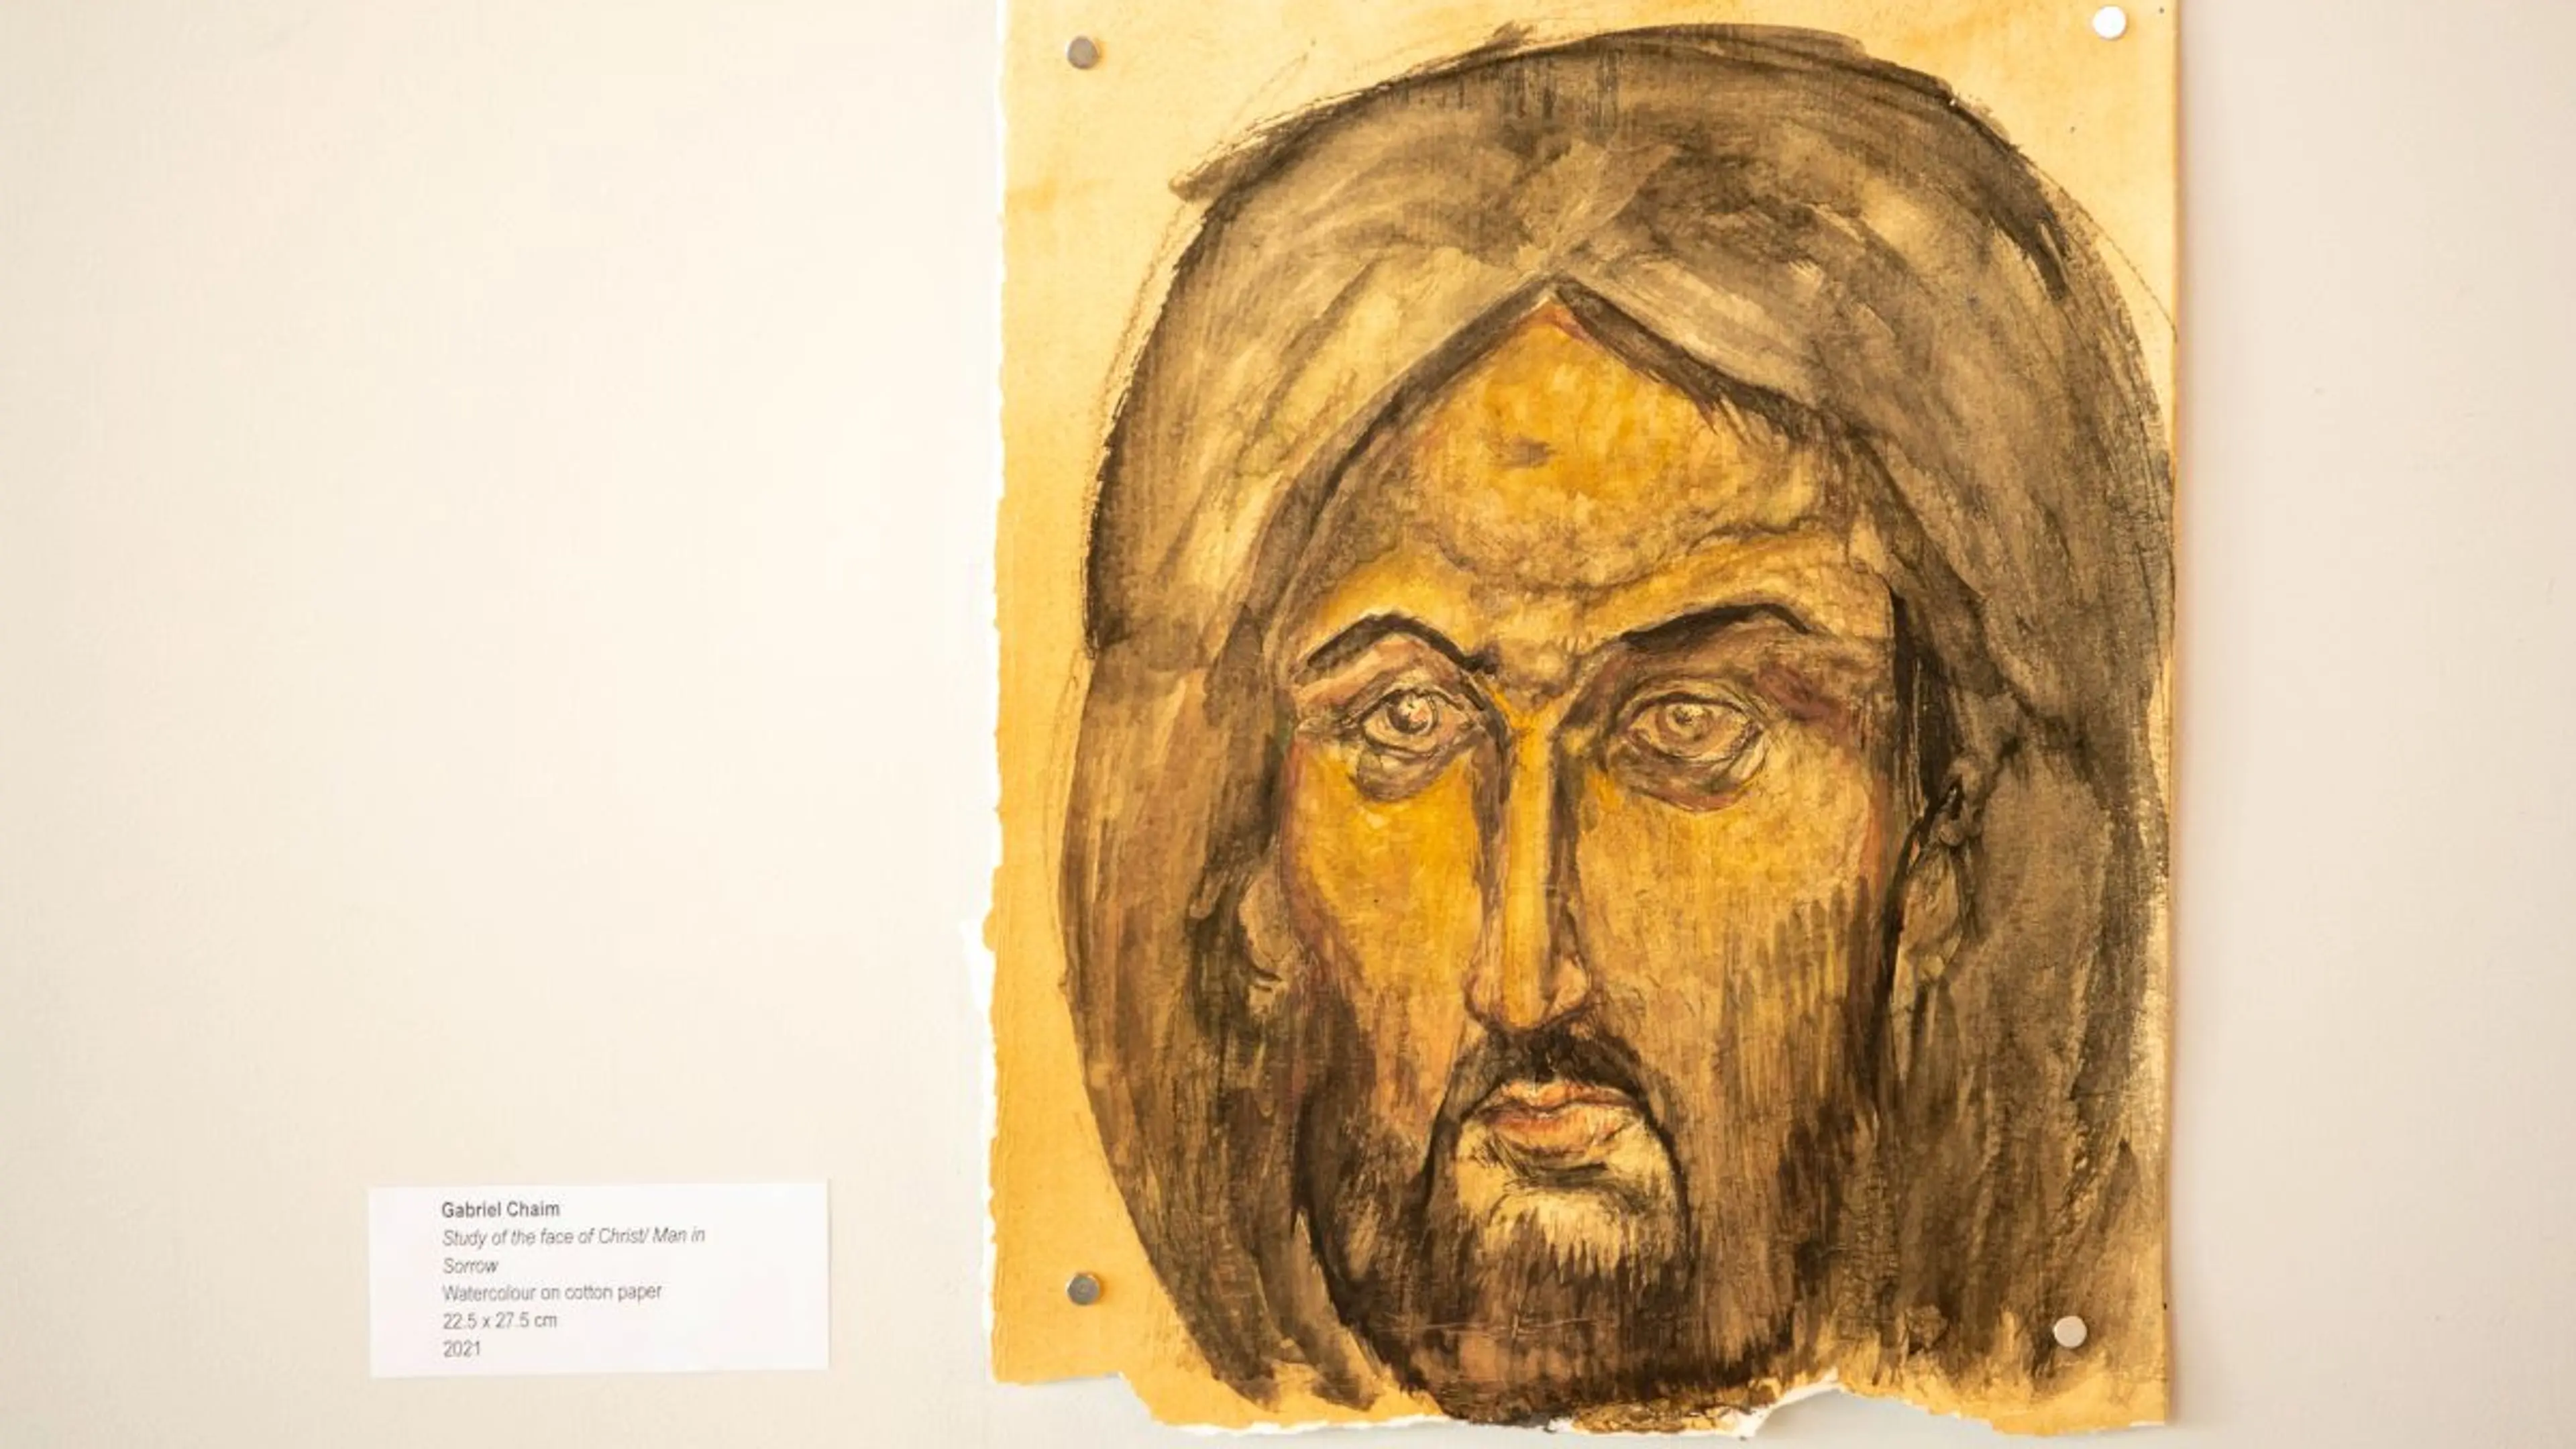 Study of the face of Christ/Man in Sorrow